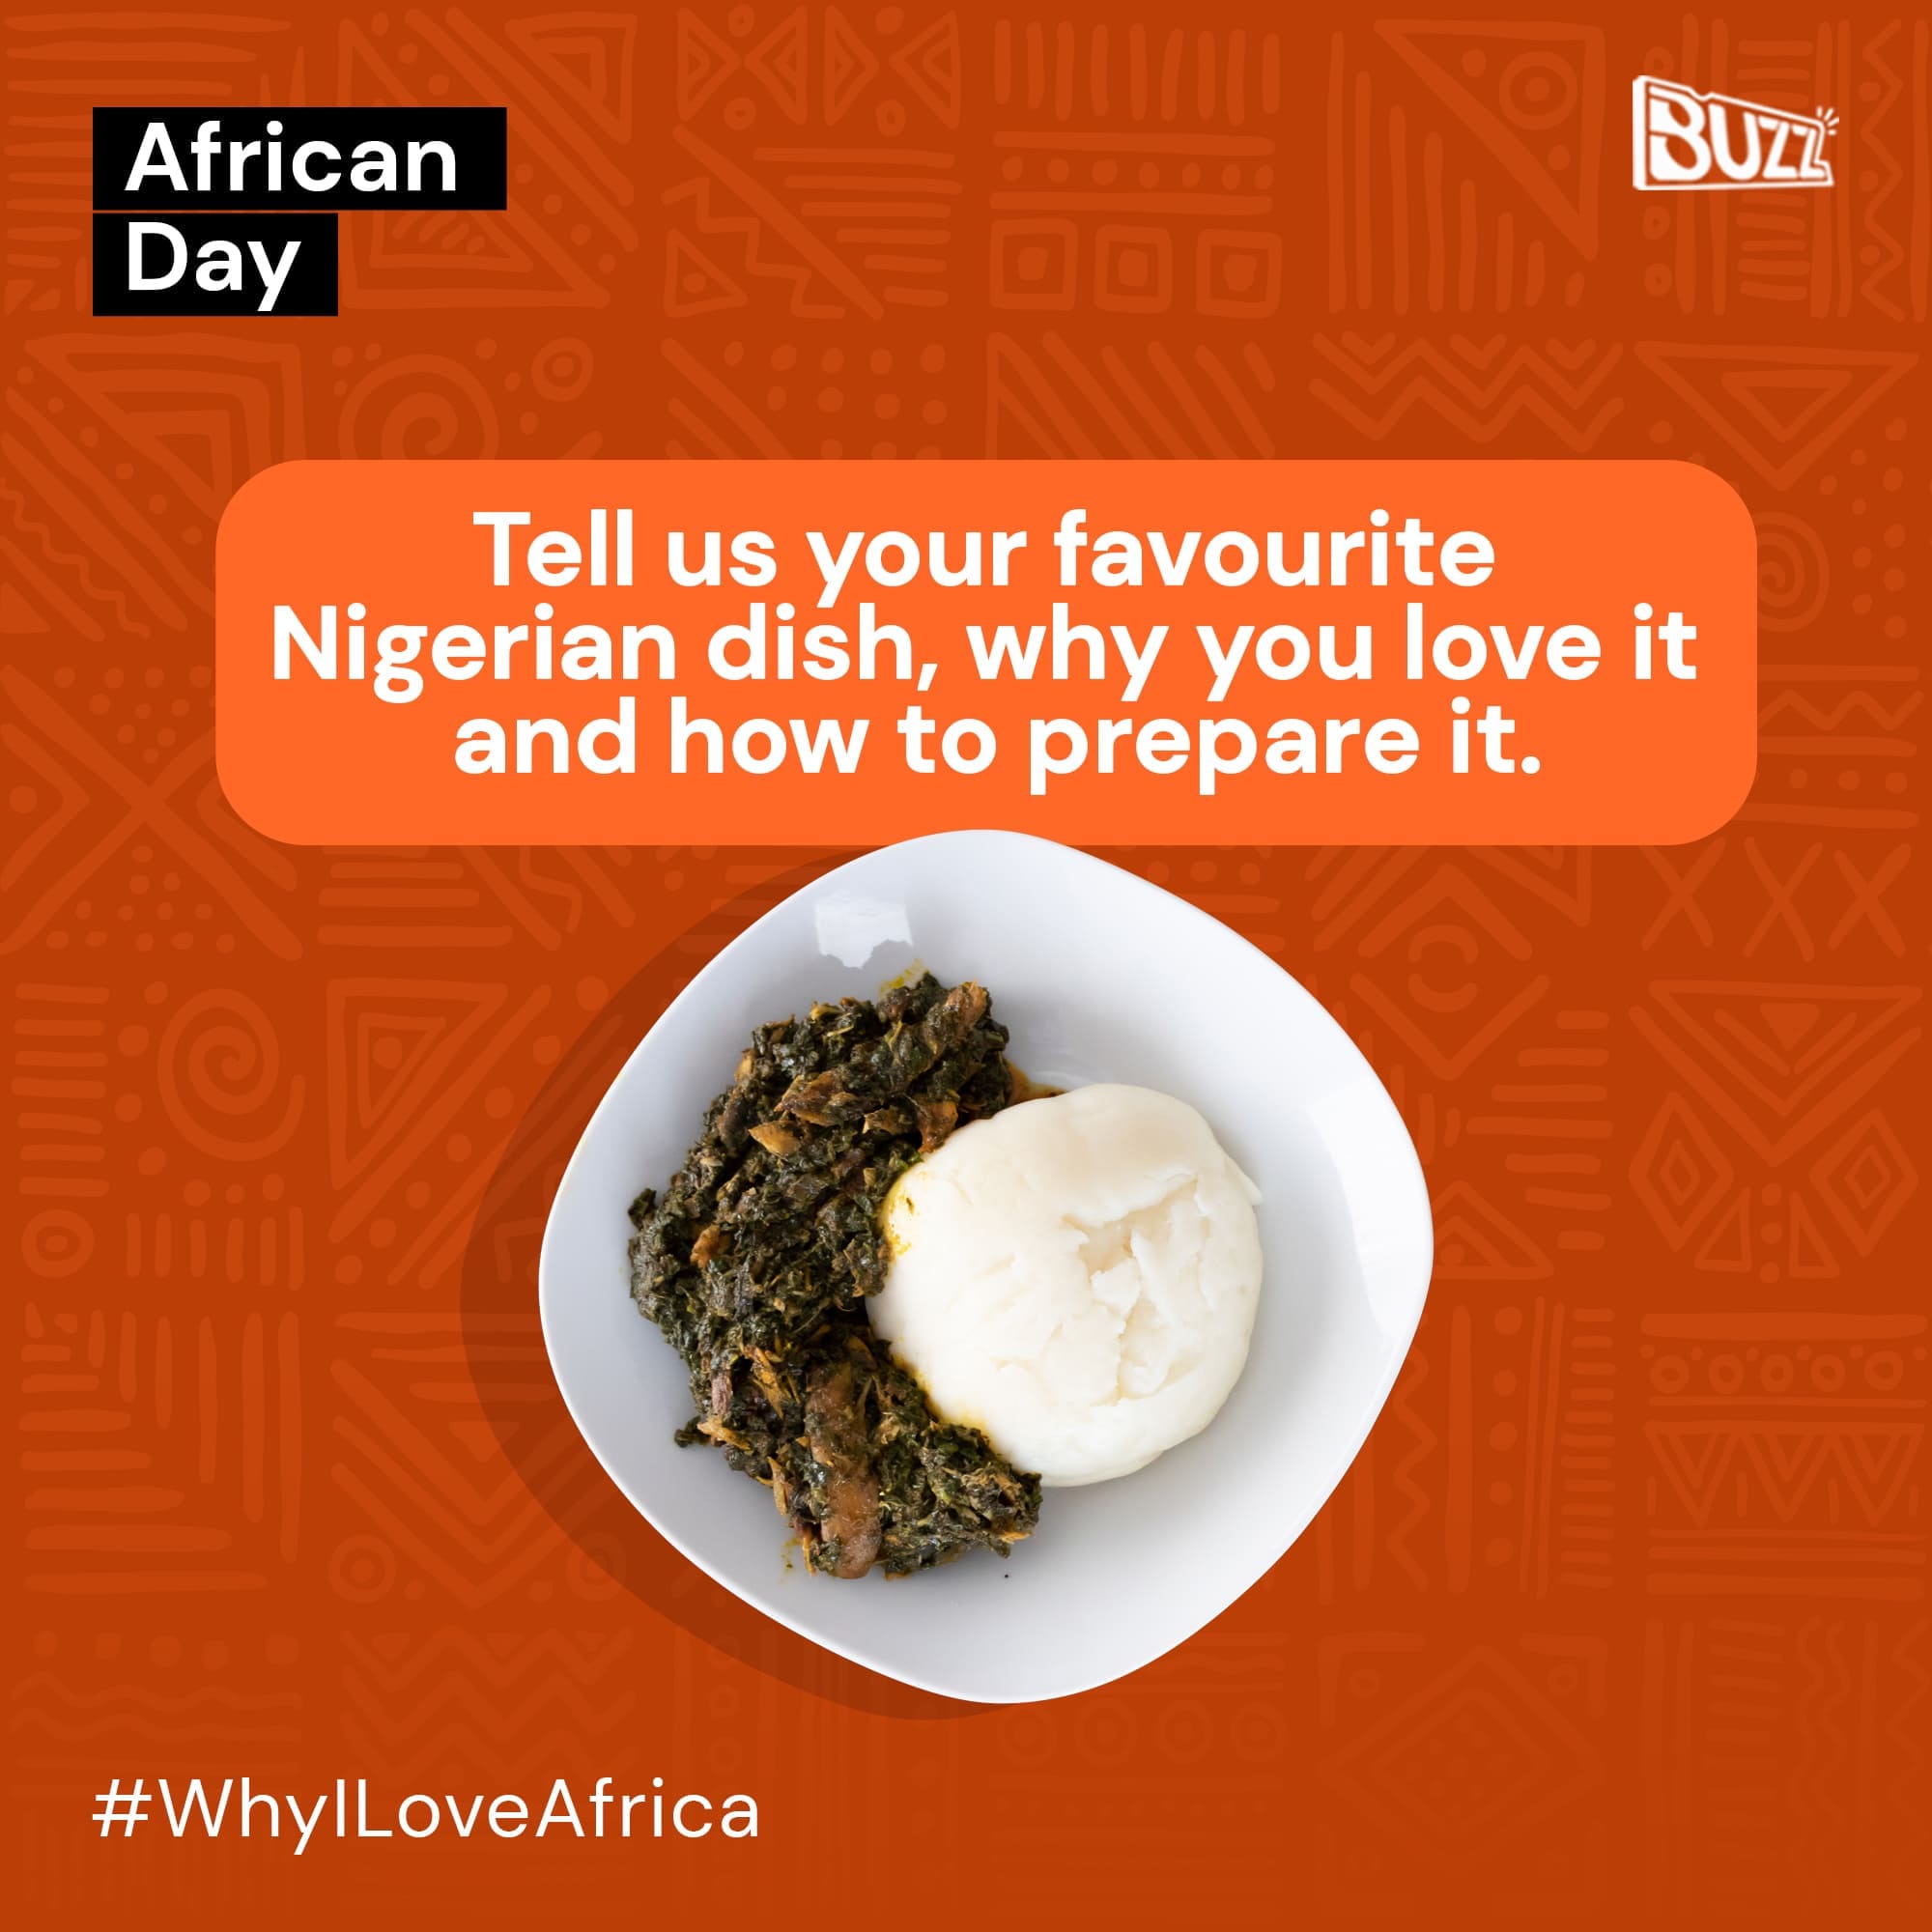 WhyILoveAfrica: Share How African You Are on Buzz and Win Weekly Subs!